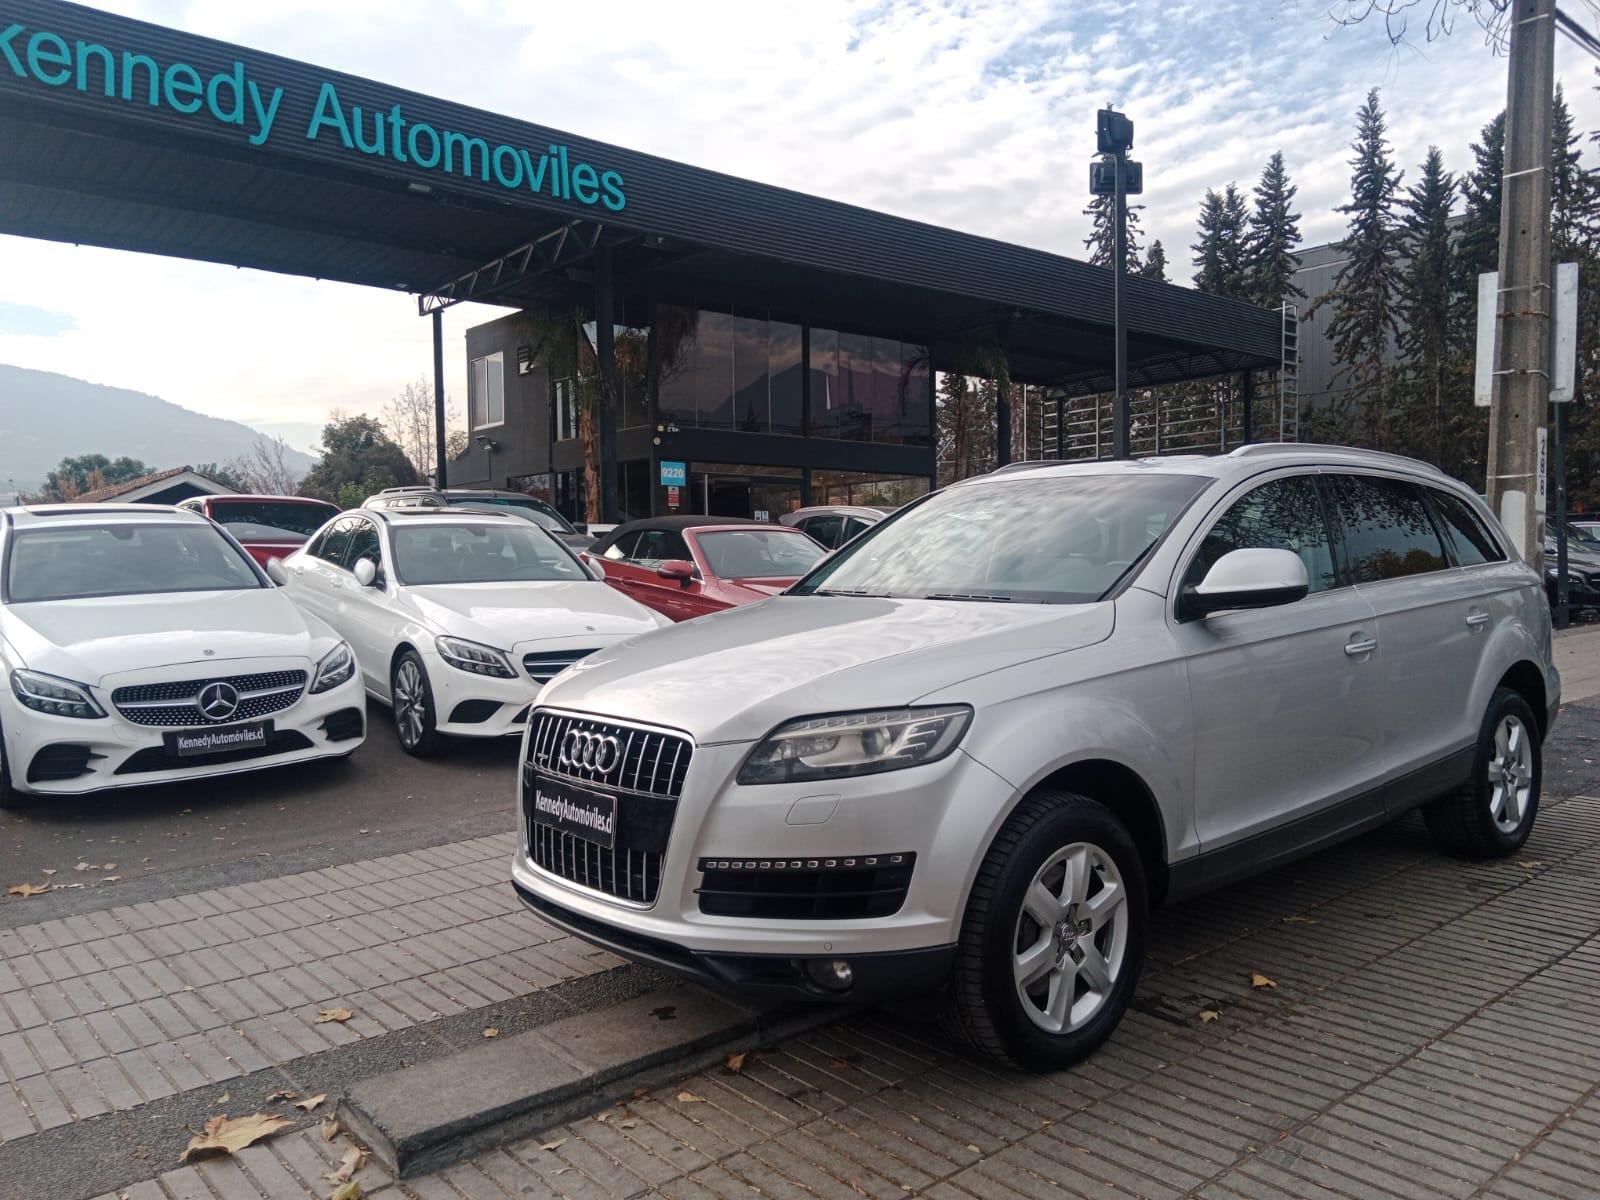 AUDI Q7 3.0 TFSI Tiptronic Quattro 333HP AT 2011 Impecable - KENNEDY AUTOMOVILES